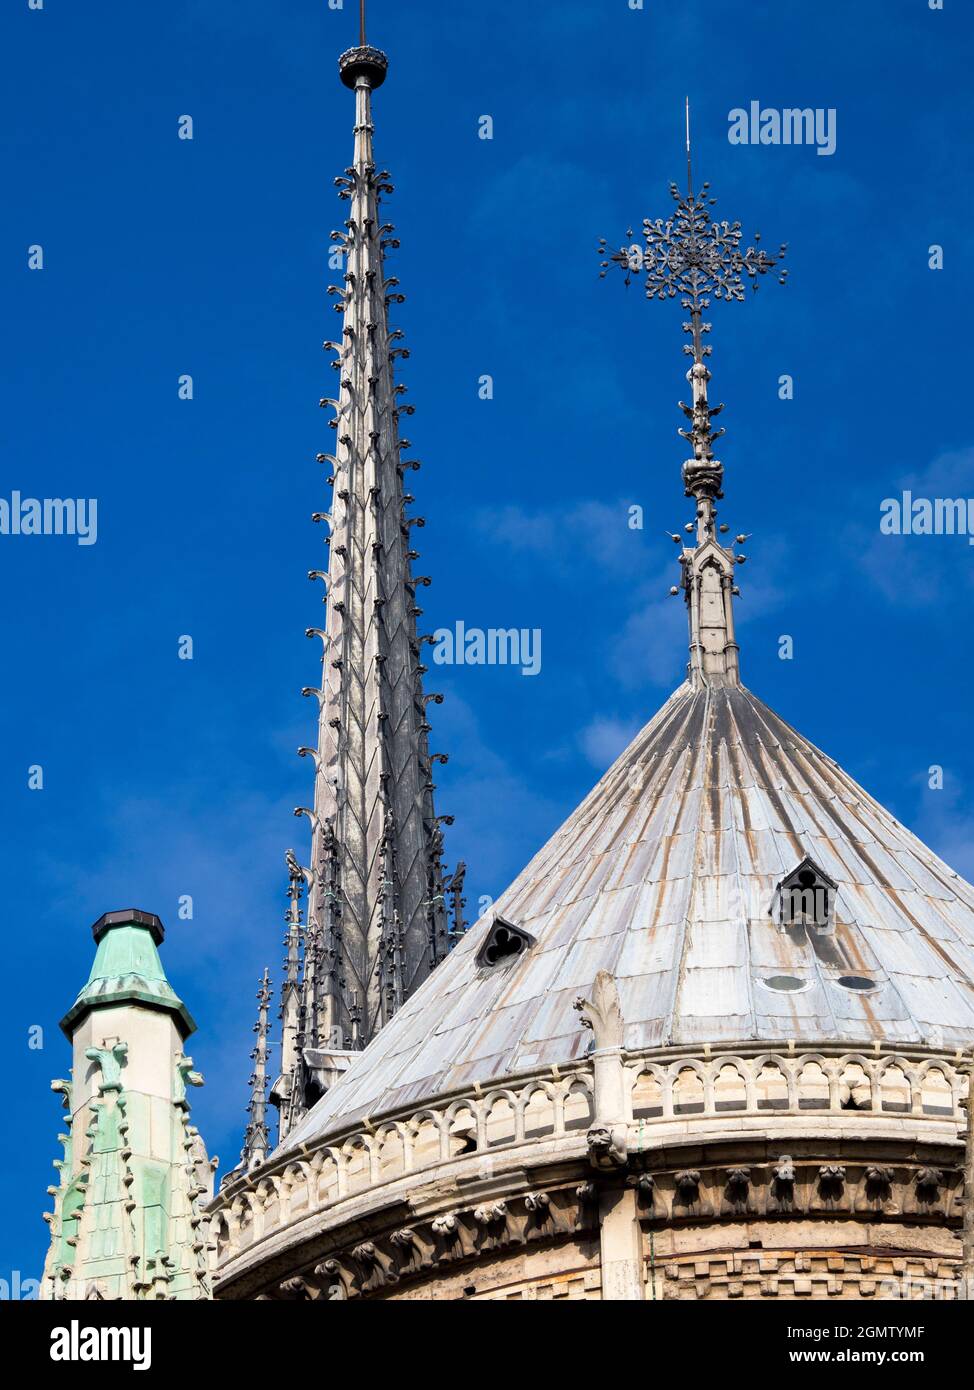 Paris, France - 19 September 2018   Notre-Dame,the famous medieval Catholic cathedra, is located on the ële de la Cit in the fourth arrondissement of Stock Photo